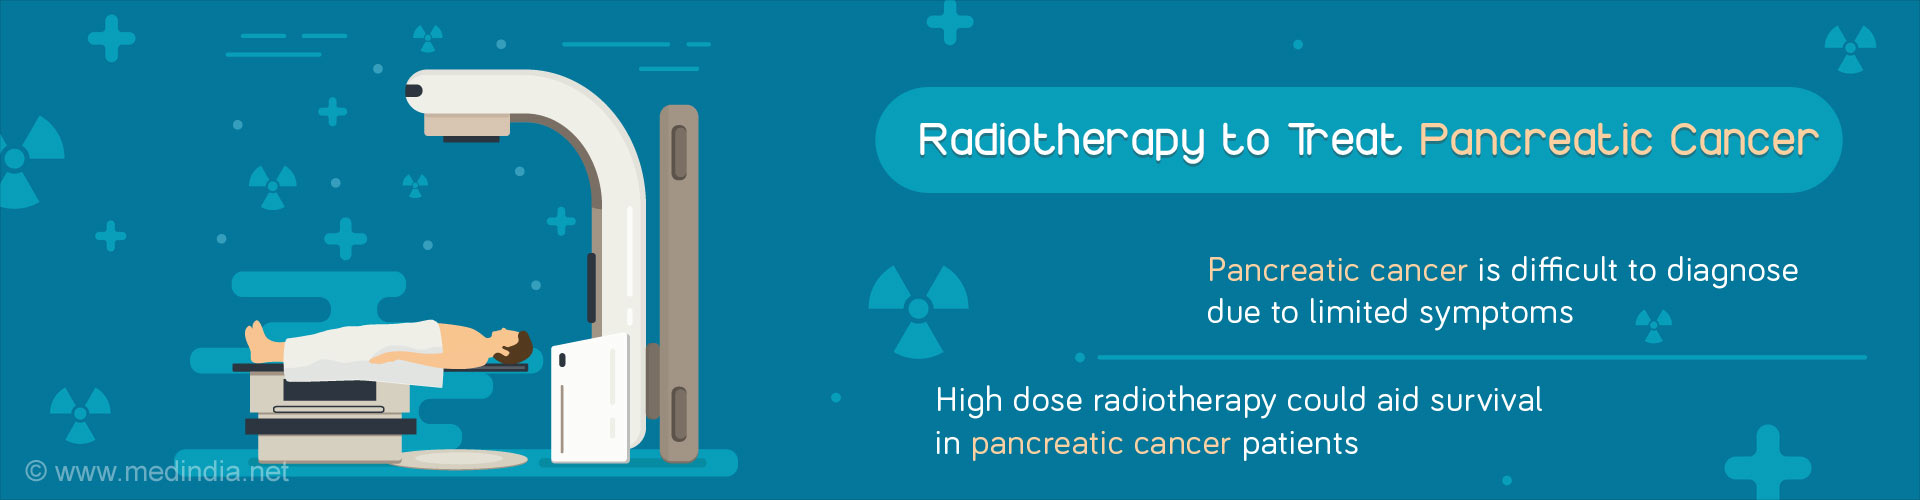 Radiotherapy to Treat Pancreatic Cancer
- Pancreatic cancer is difficult to diagnose due to limited symptoms
- High dose radiotherapy could aid survival in pancreatic cancer patients